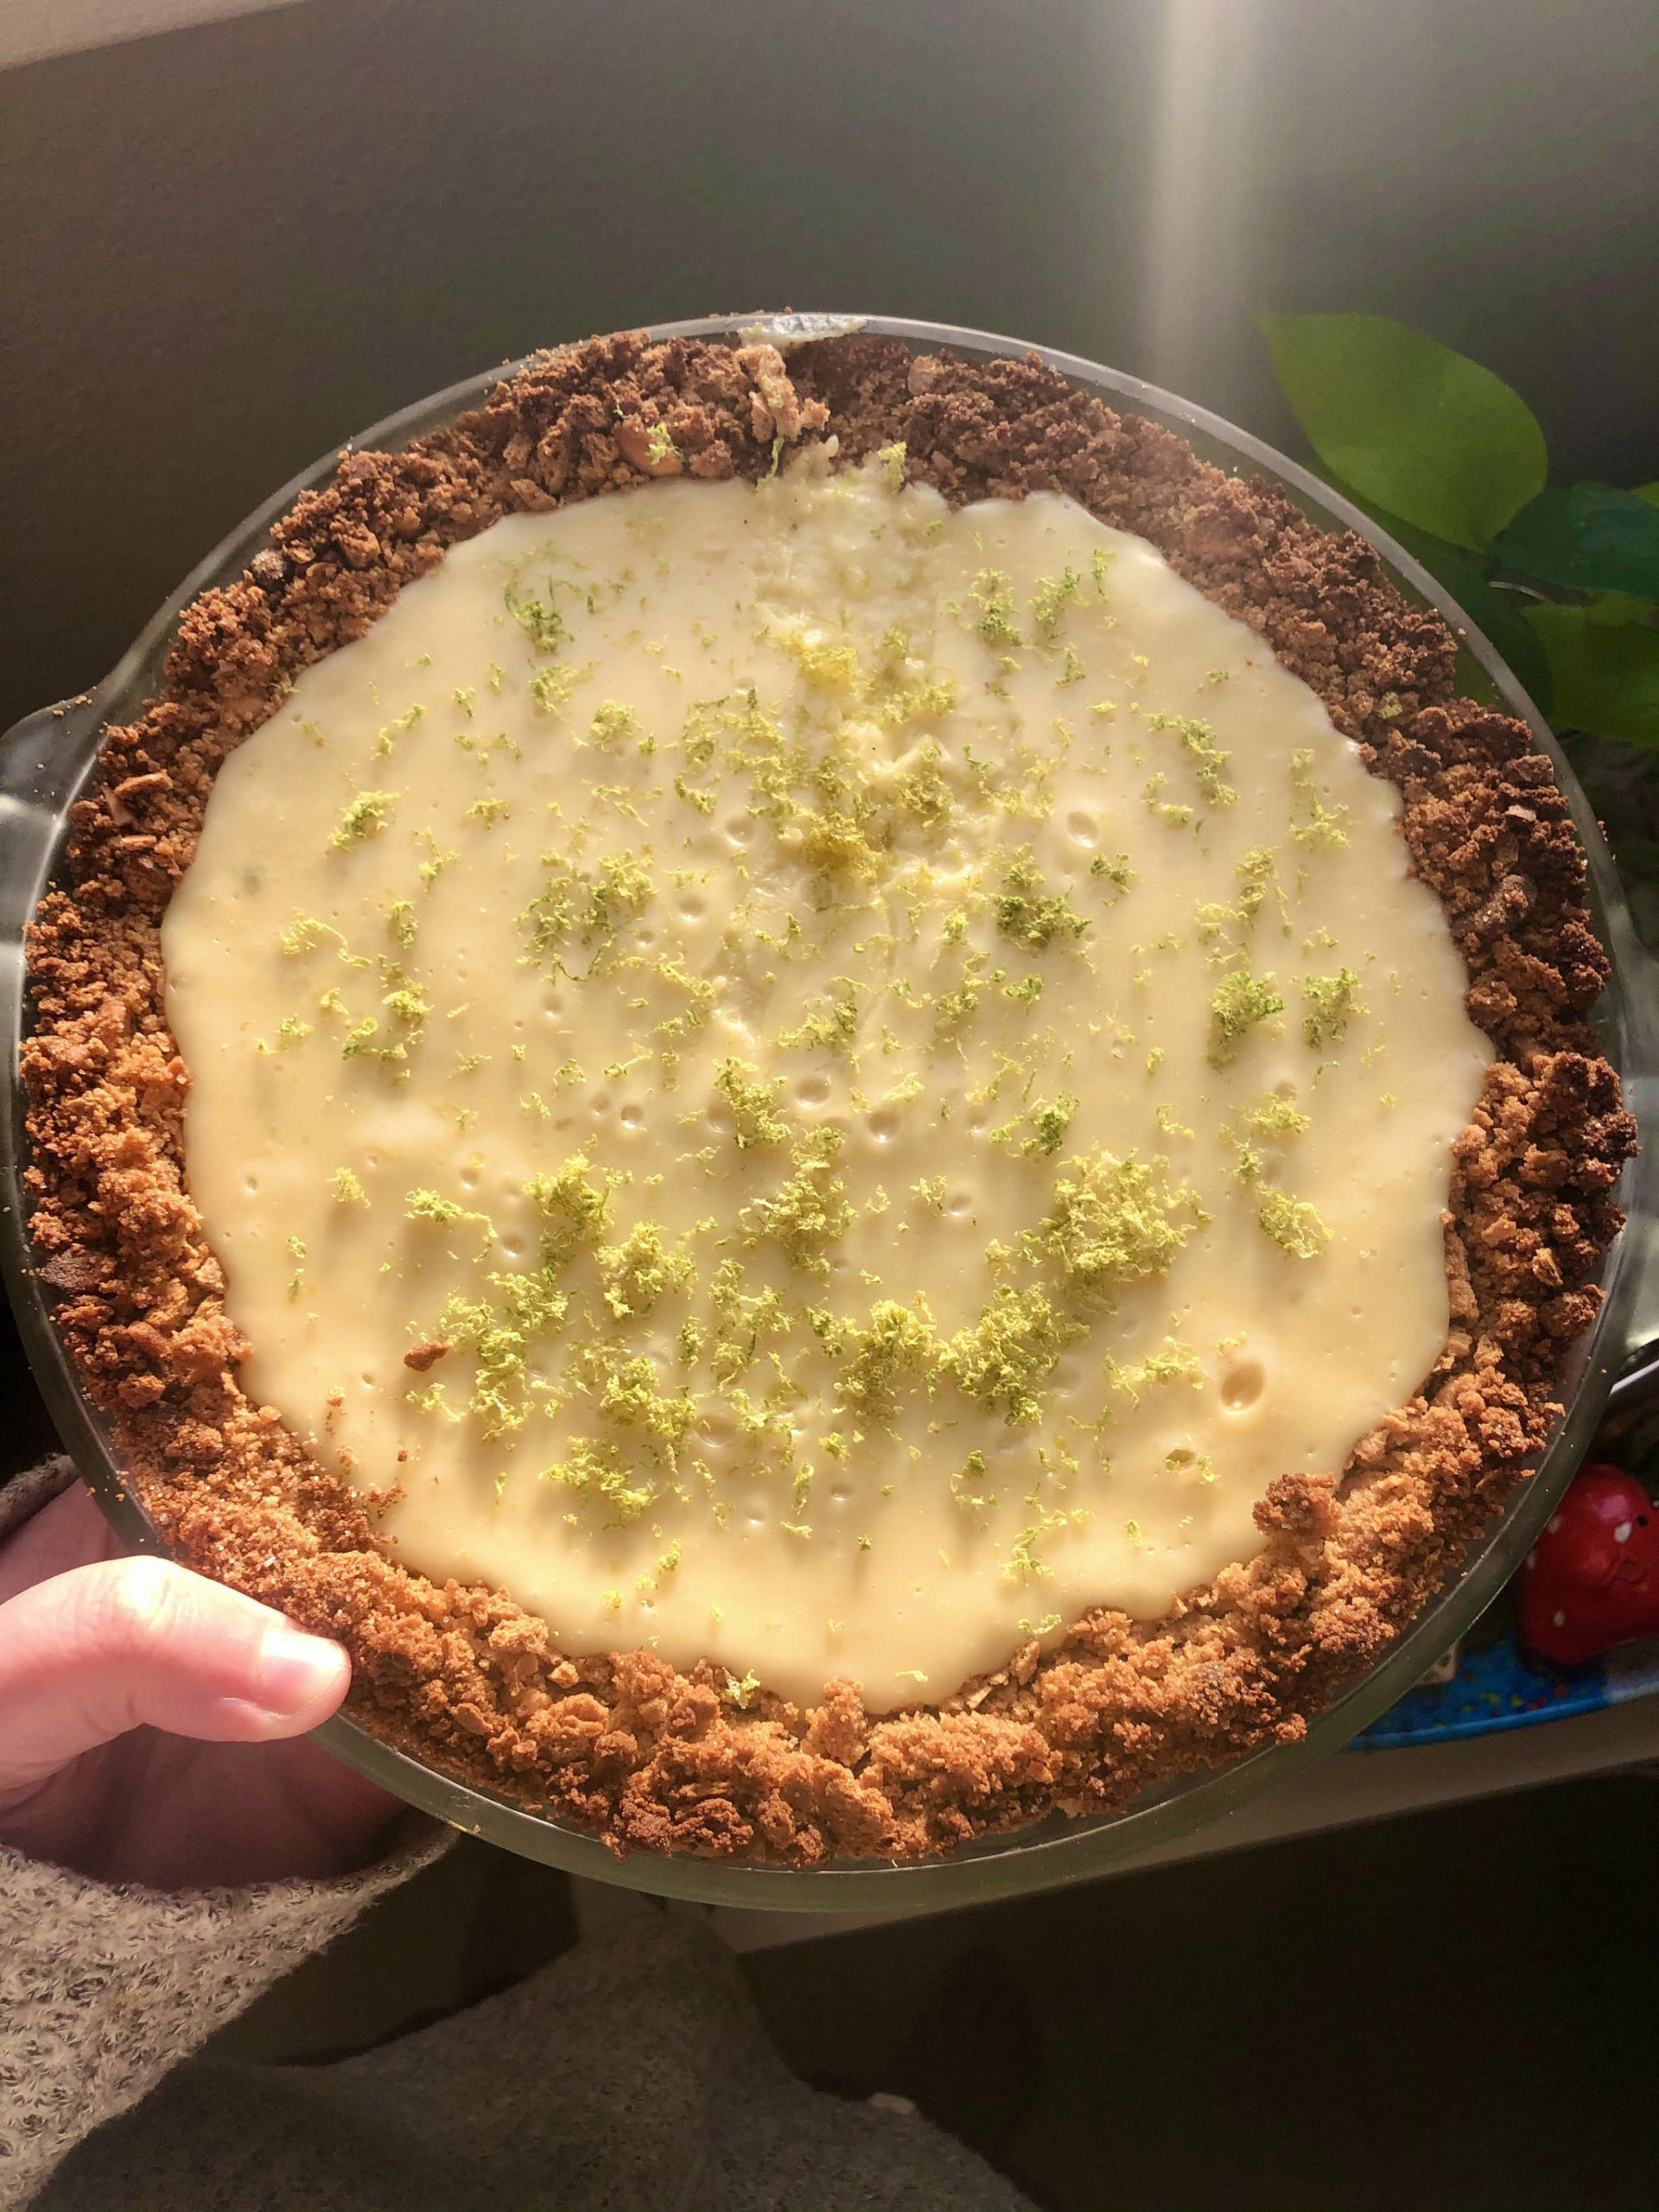 Key lime pie, inspired by a recipe from Kim Sunée, makes a refreshing winter dessert, on Wednesday, Jan. 20, in Anchorage, Alaska. (Photo by Victoria Petersen/Peninsula Clarion)